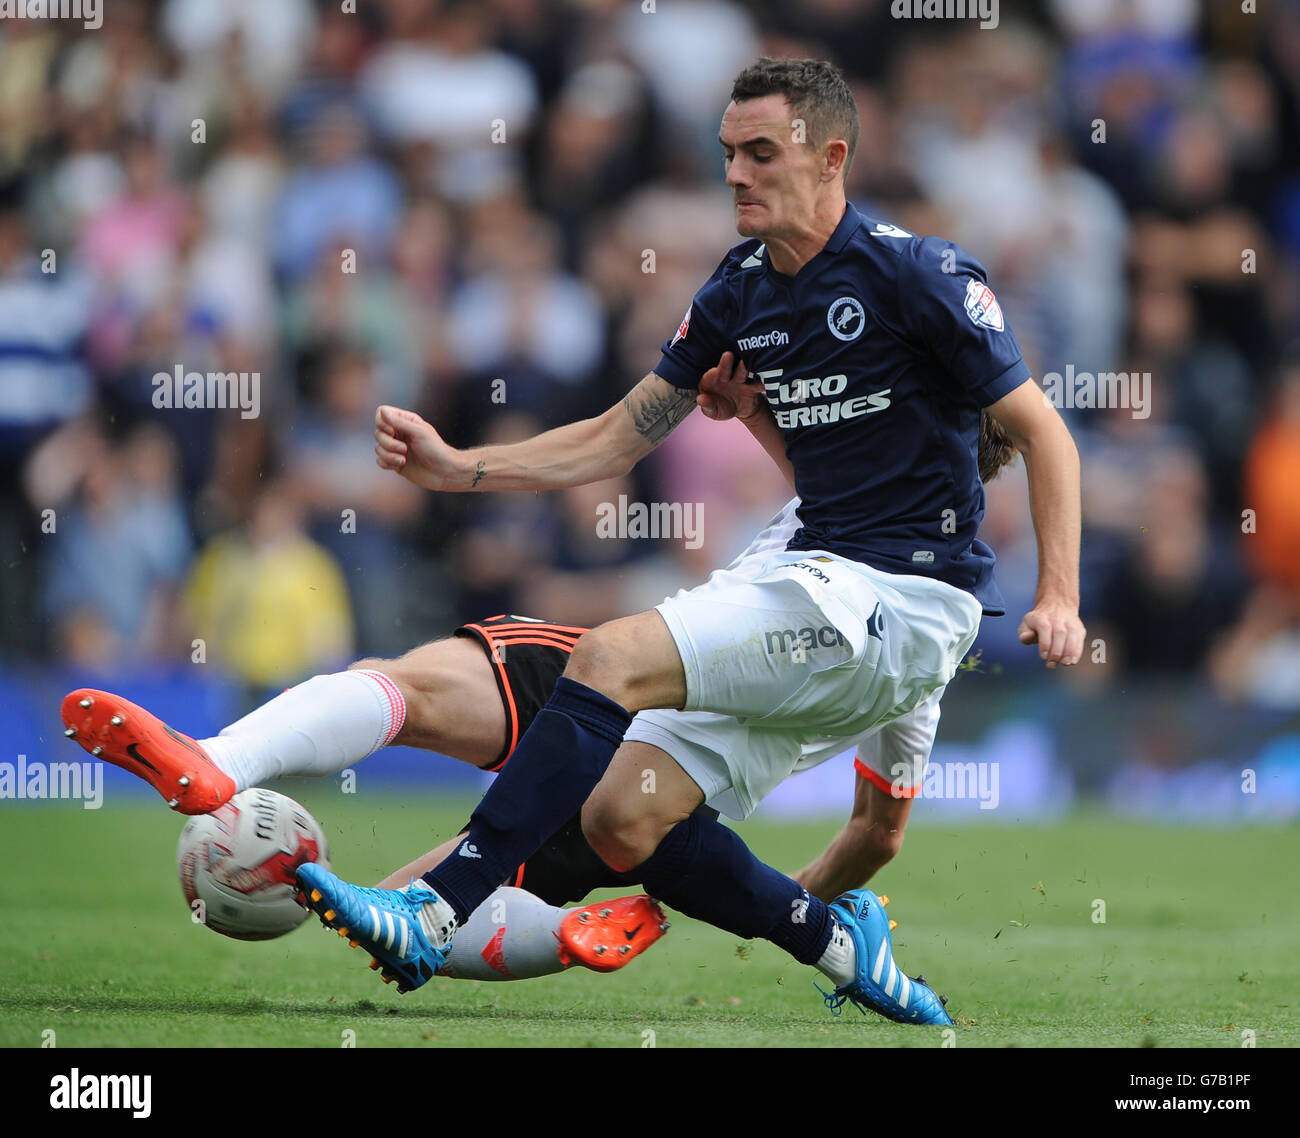 Soccer - Sky Bet Championship - Fulham v Millwall - Craven Cottage. Fulham's Scott Parker (hidden) and Milwall's Shaun Williams (front) battle for the ball. Stock Photo